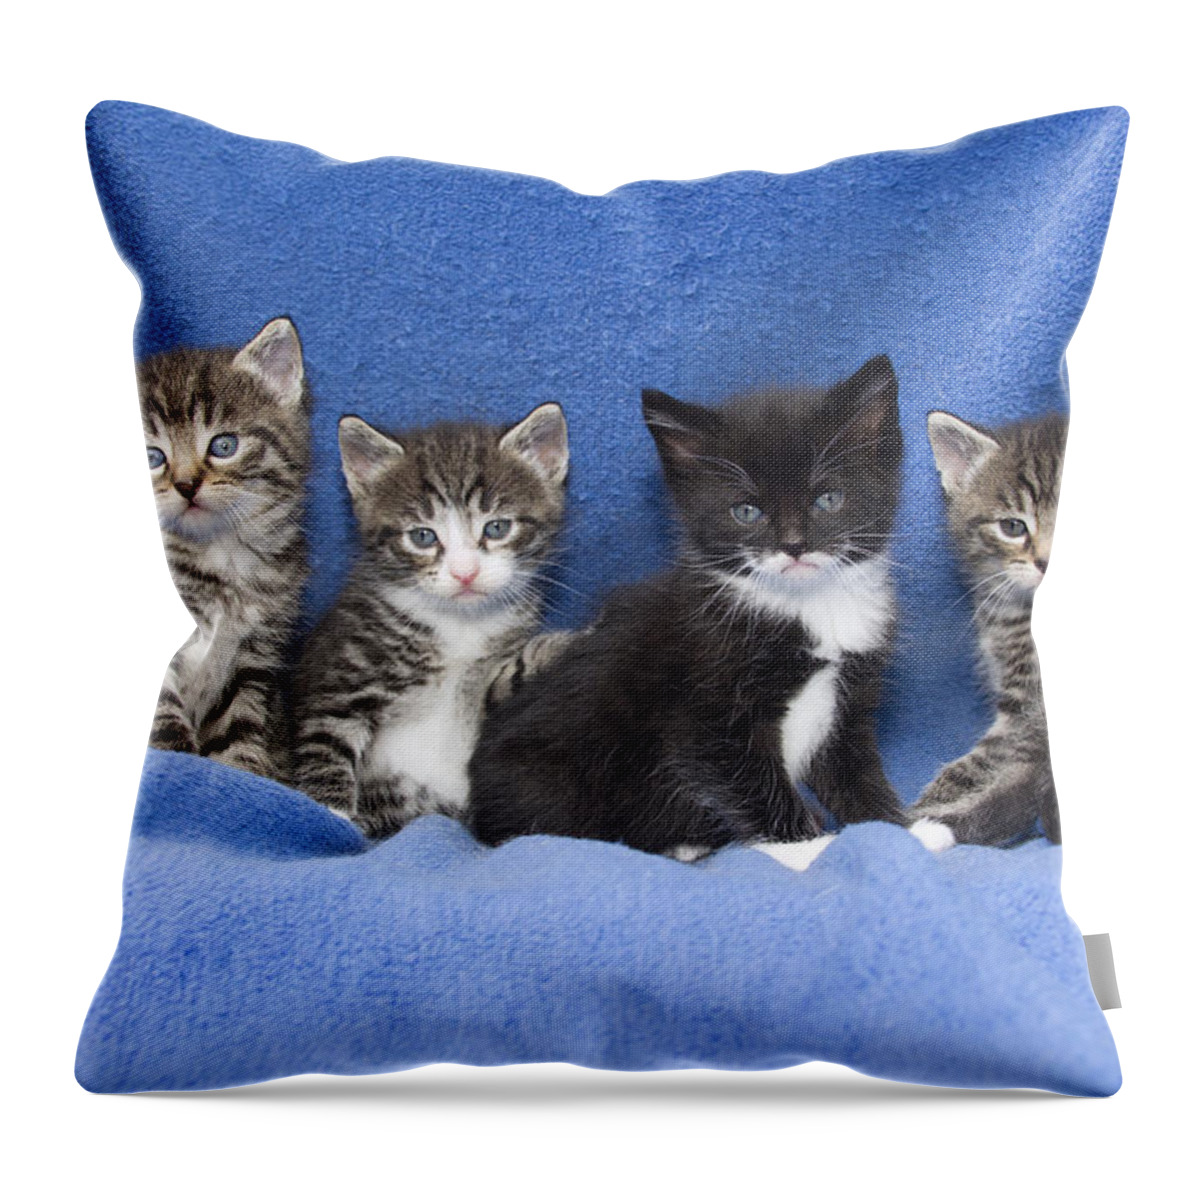 Feb0514 Throw Pillow featuring the photograph Kittens Sitting On Blanket by Duncan Usher